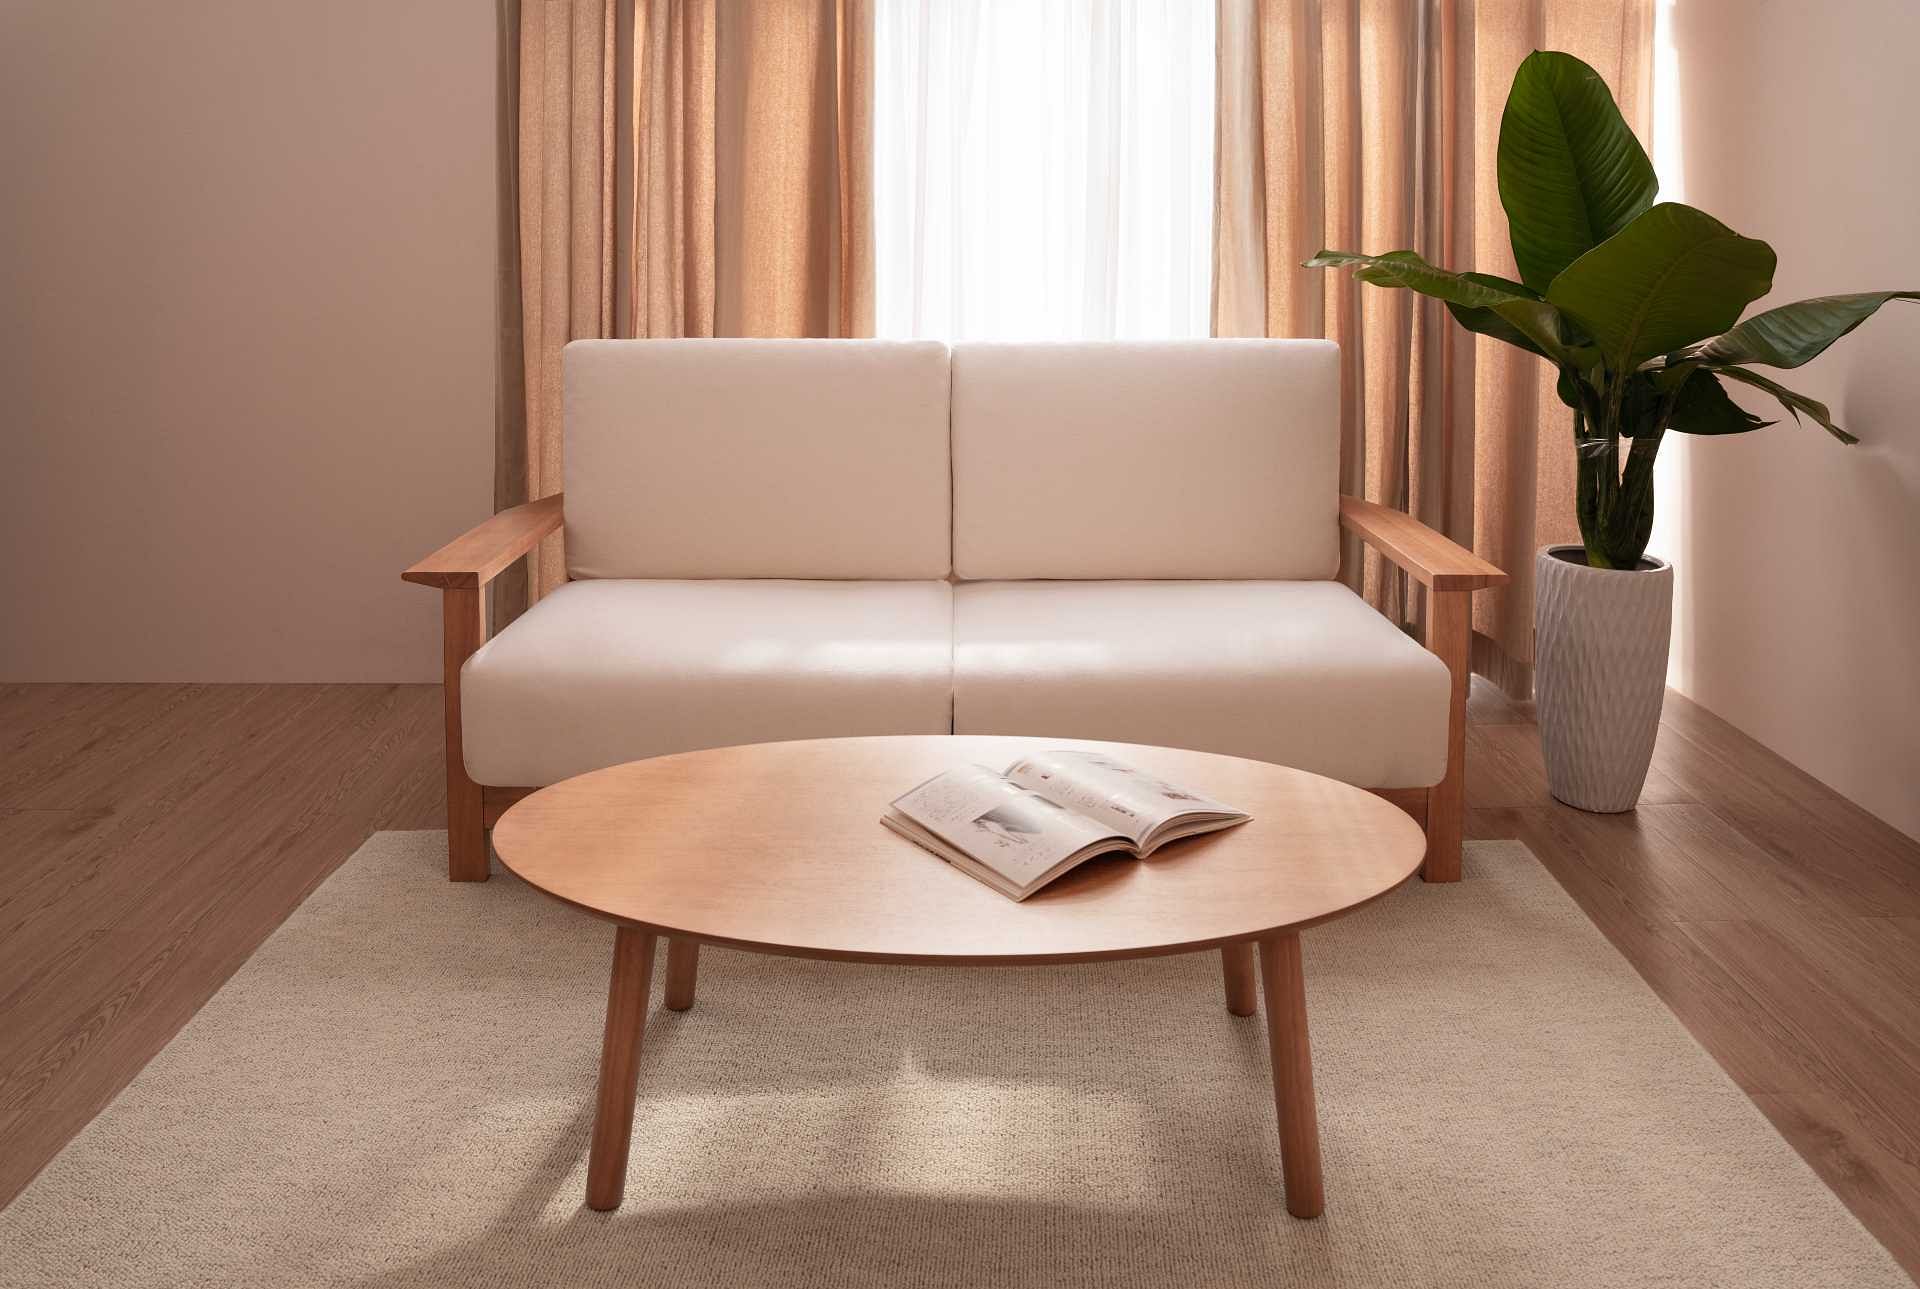 muji furniture: new 2023 collection launched, see all prices here!